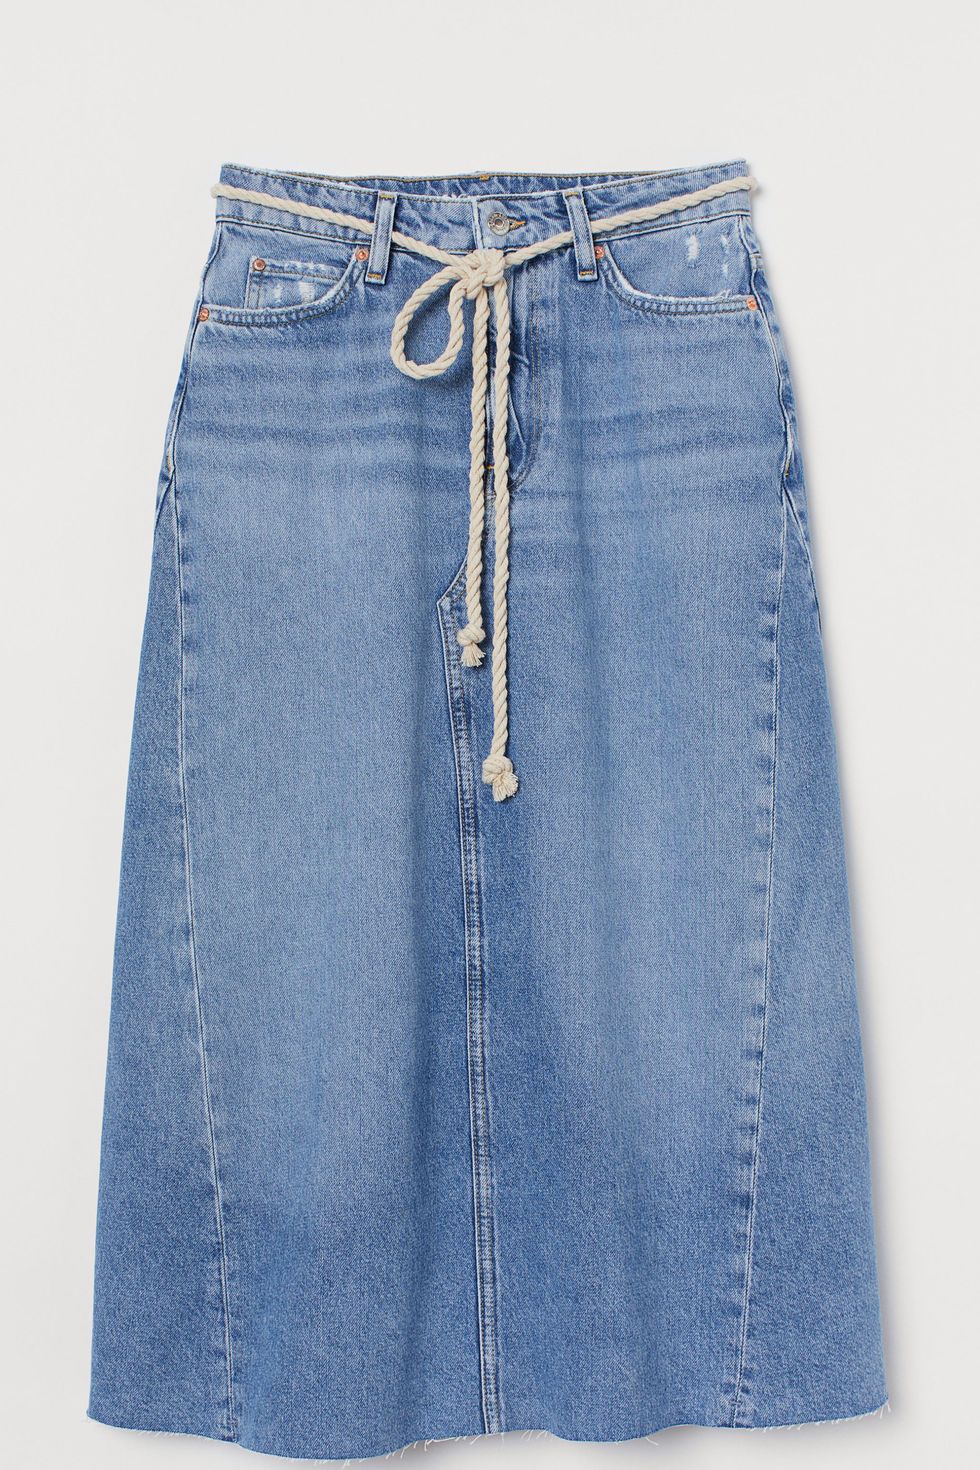 This TikTok-Viral H&M Denim Mini Skirt Is Selling Out